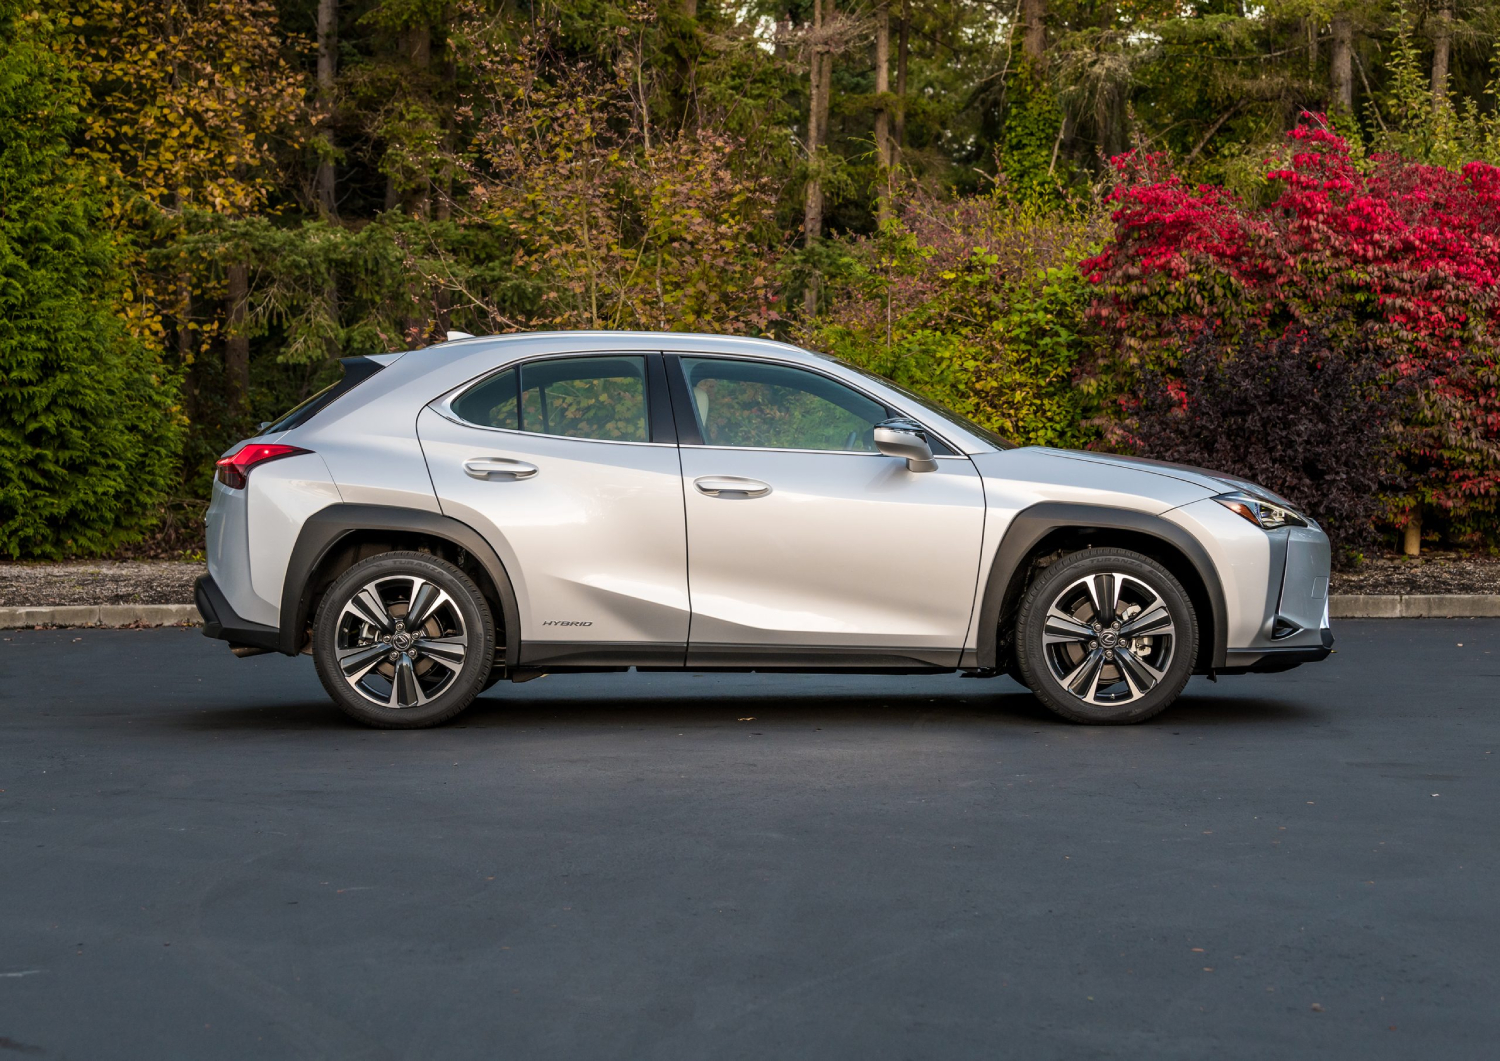 The best SUVs of 2022 that nobody bought includes the Lexus UX